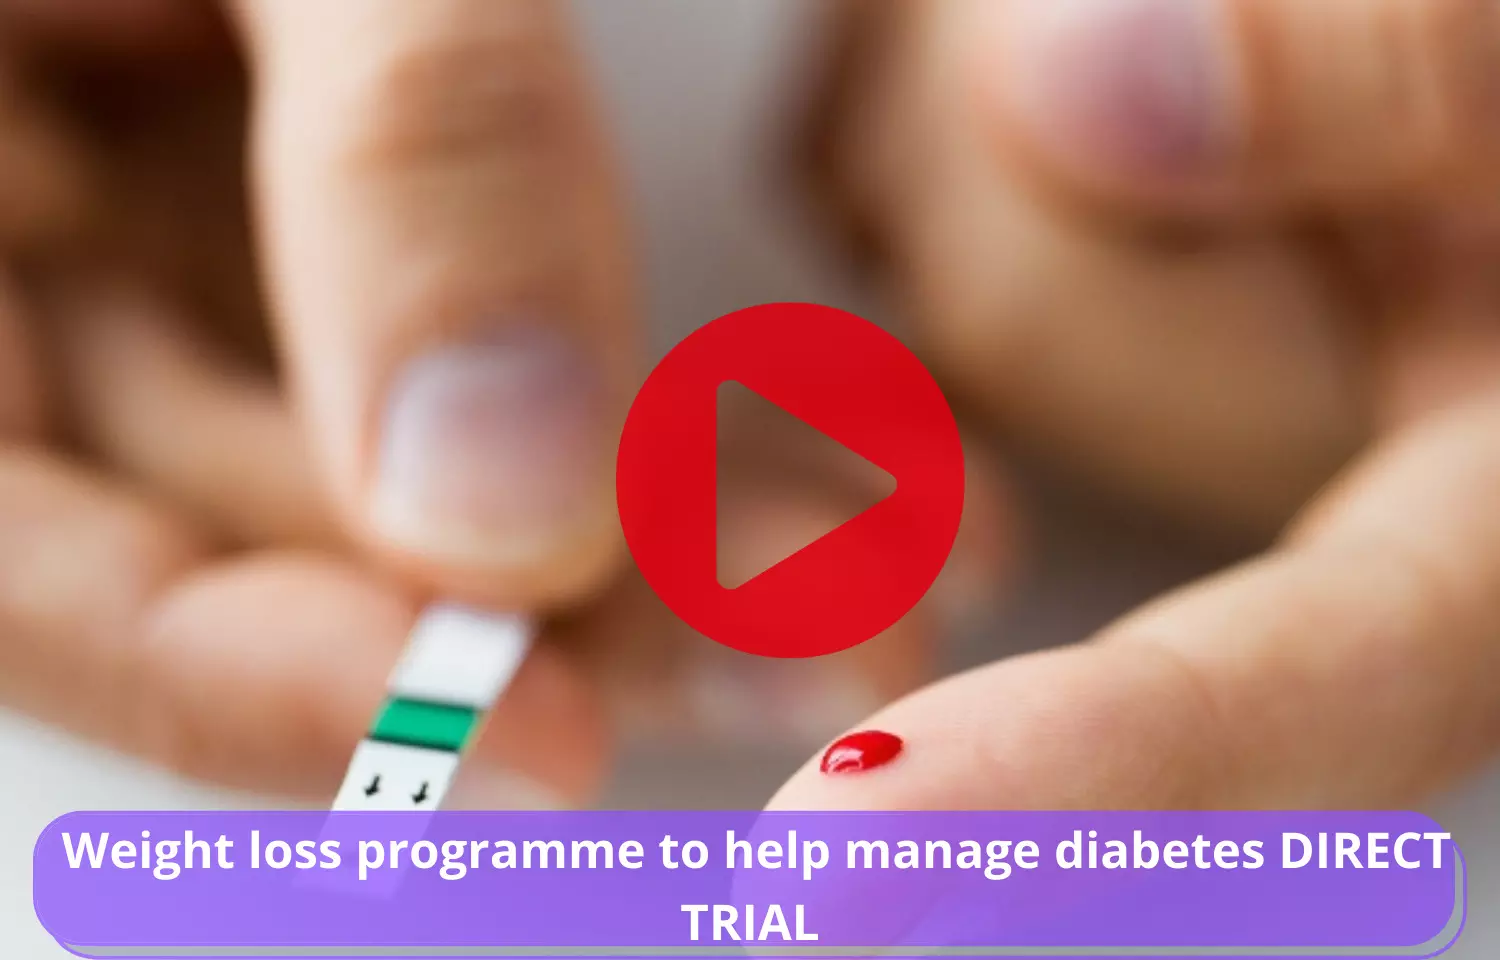 Journal Club - Weight loss programme to be effective in managing diabetes: DIRECT TRIAL